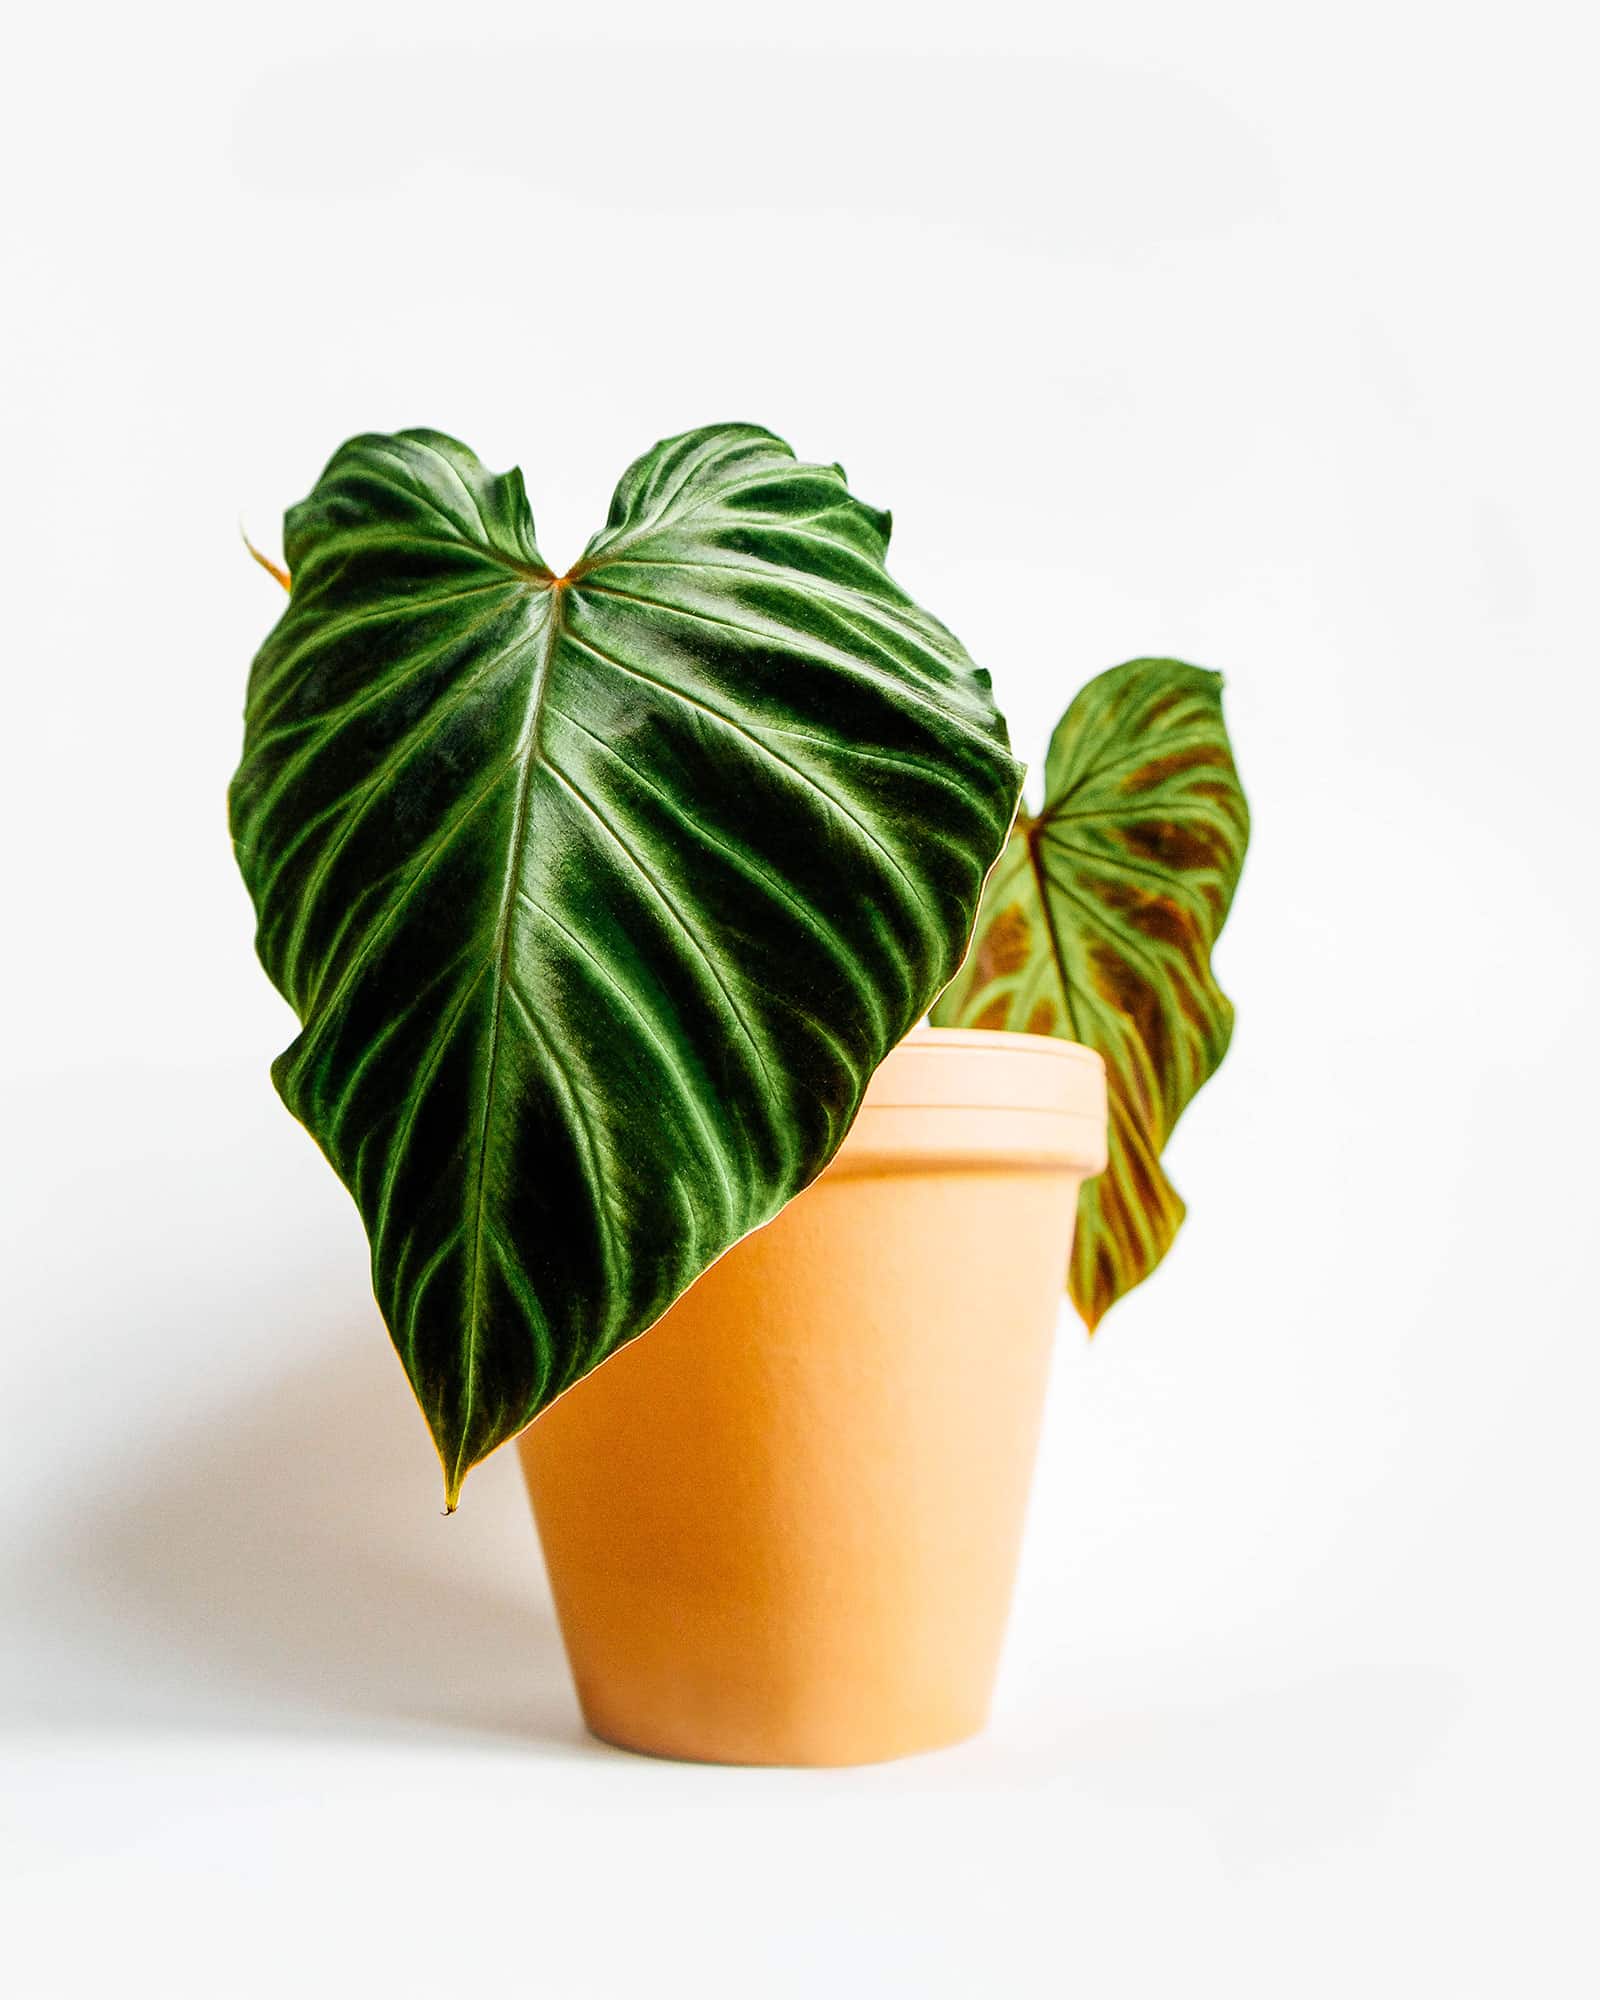 Philodendron verrucosum houseplant in a terracotta pot against a white background